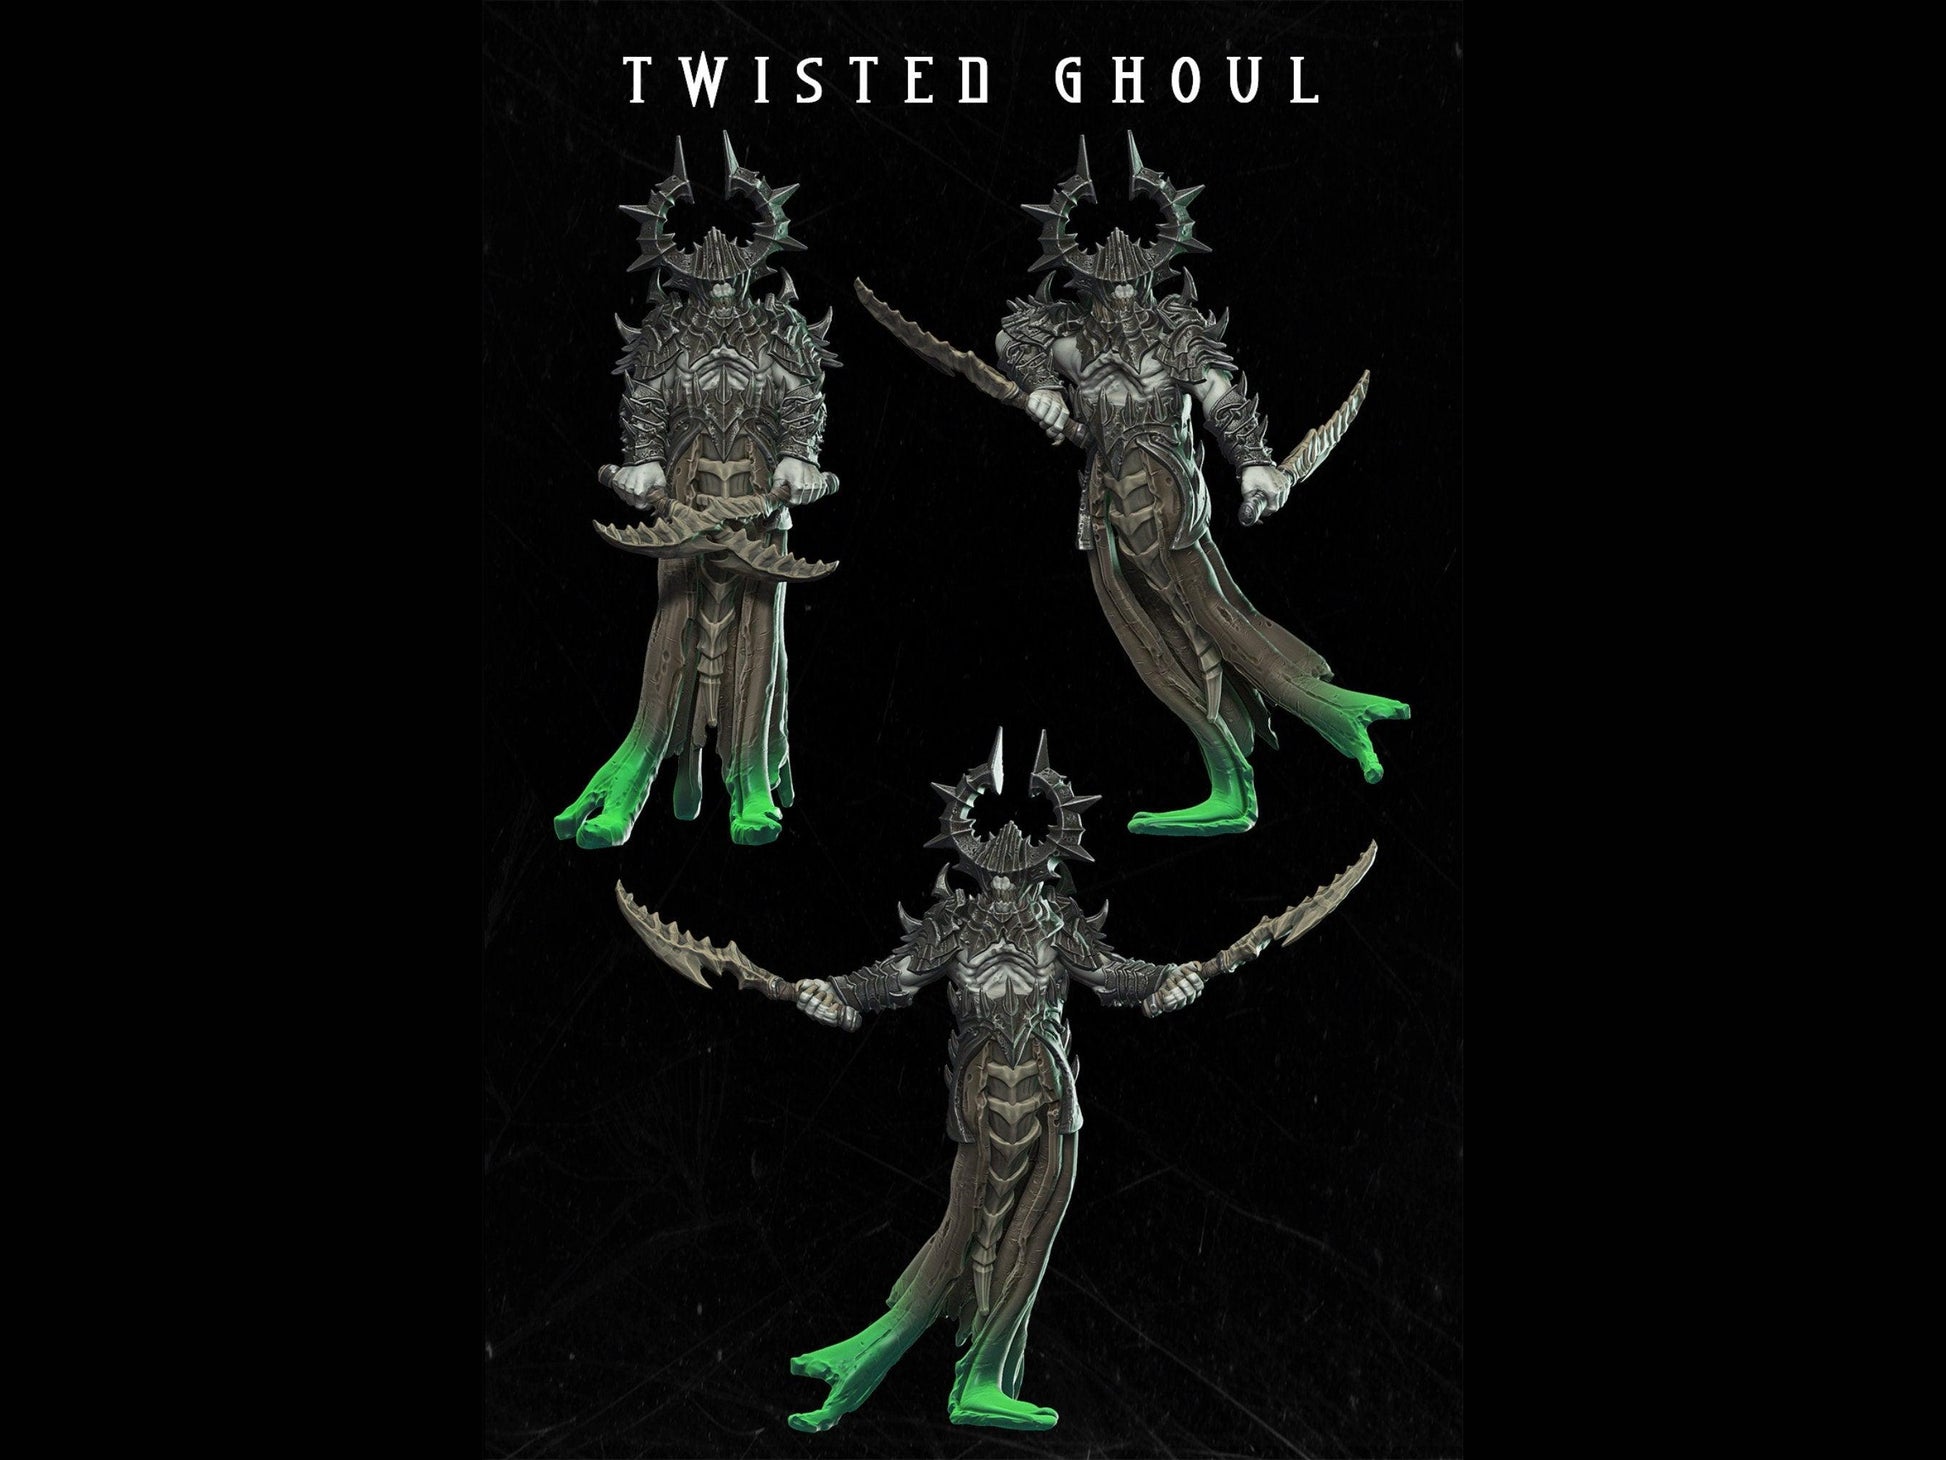 Twisted Ghoul Miniature undead miniature - 28mm scale Tabletop gaming DnD Miniature Dungeons and Dragons, Mage miniature, dnd 5e wargaming - Plague Miniatures shop for DnD Miniatures